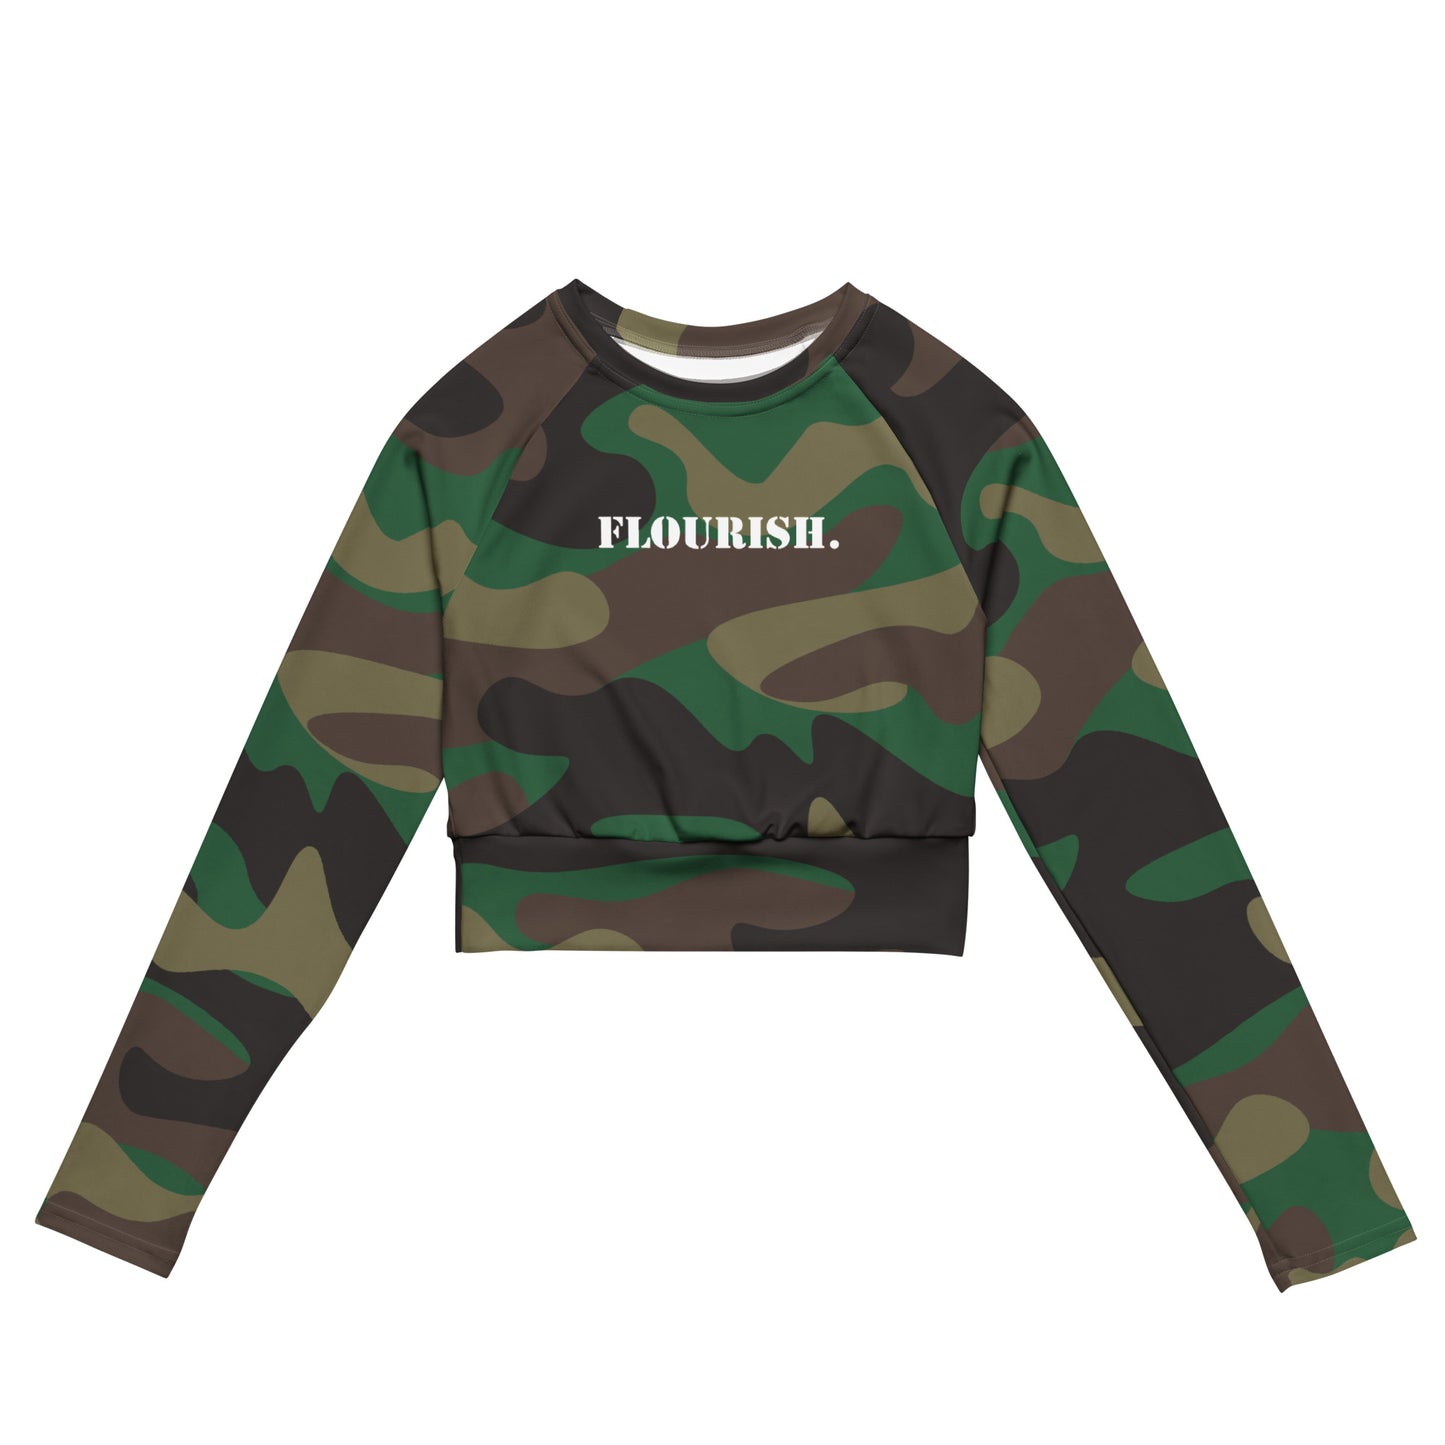 "Flourish." Recycled Long-Sleeve Crop Top - Green Camouflage